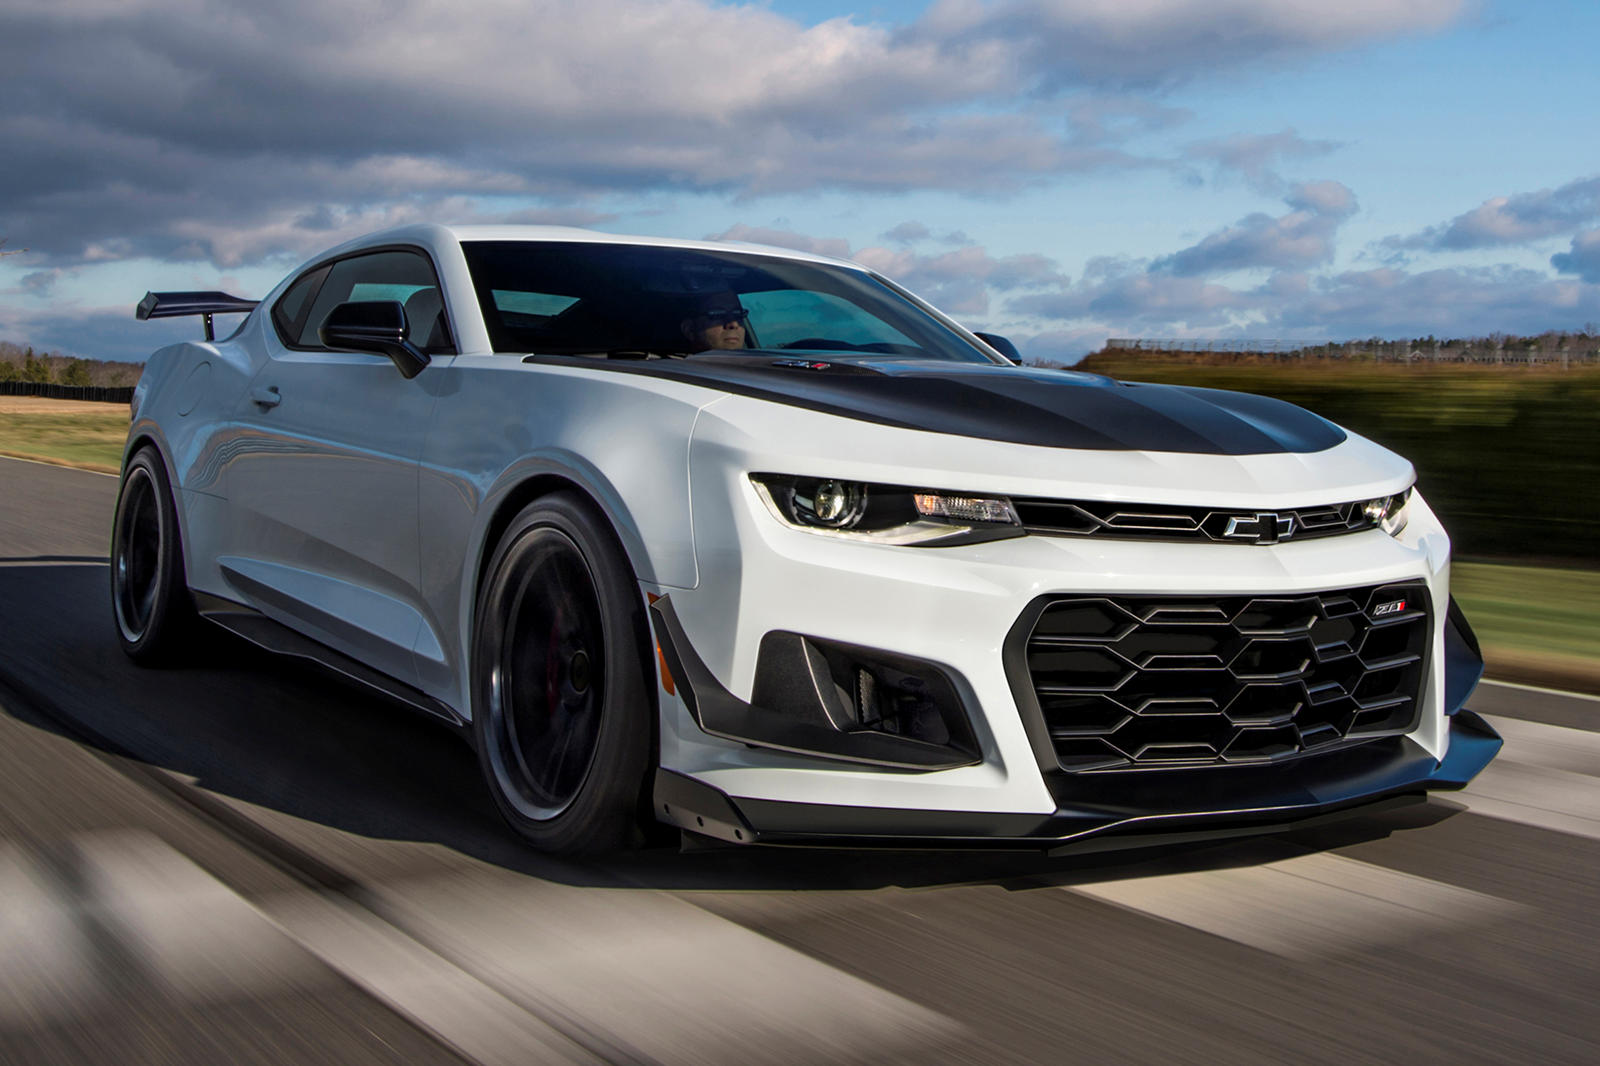 5 Things You Need To Know About The Chevrolet Camaro Zl1 1le Porn Sex